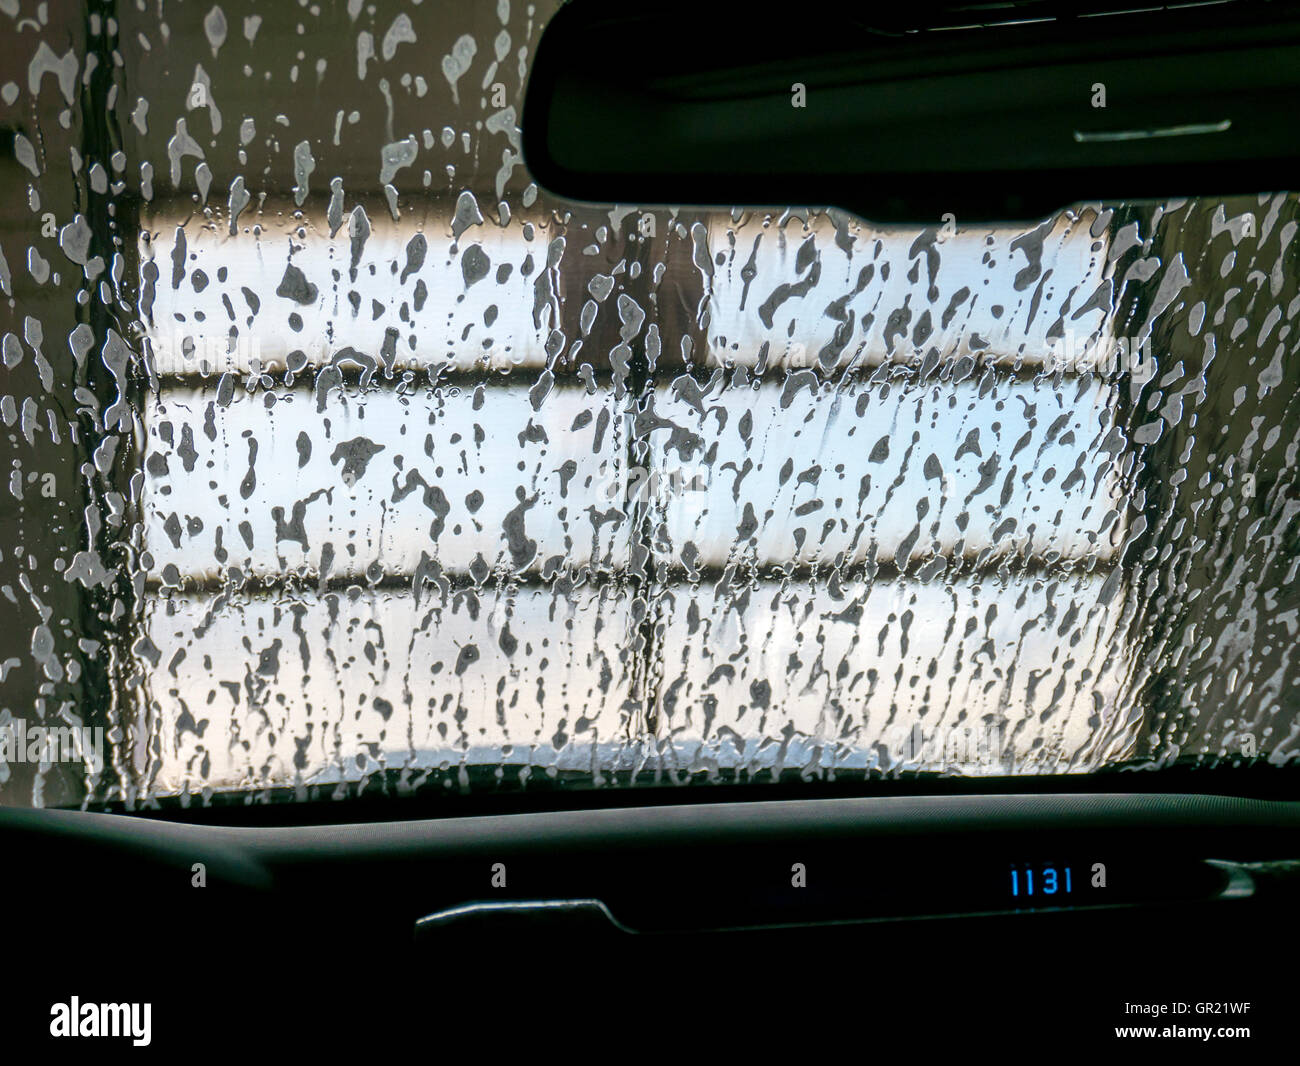 View through car windshield of automated car wash Stock Photo